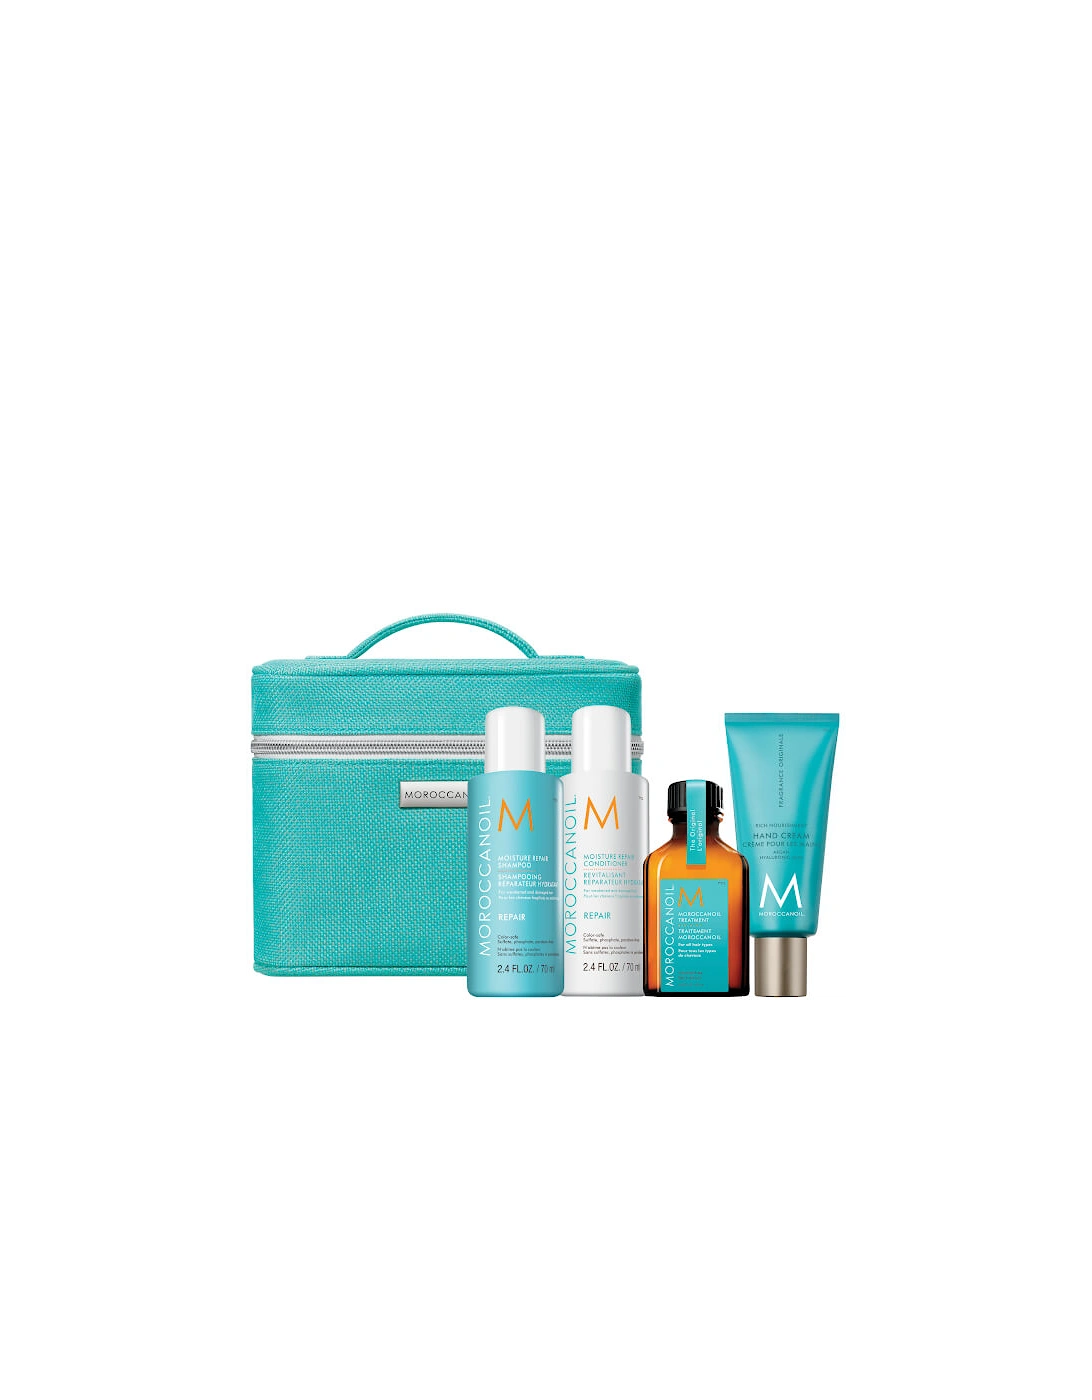 Moroccanoil Moisture Repair Discovery Kit (Worth £37.55), 2 of 1